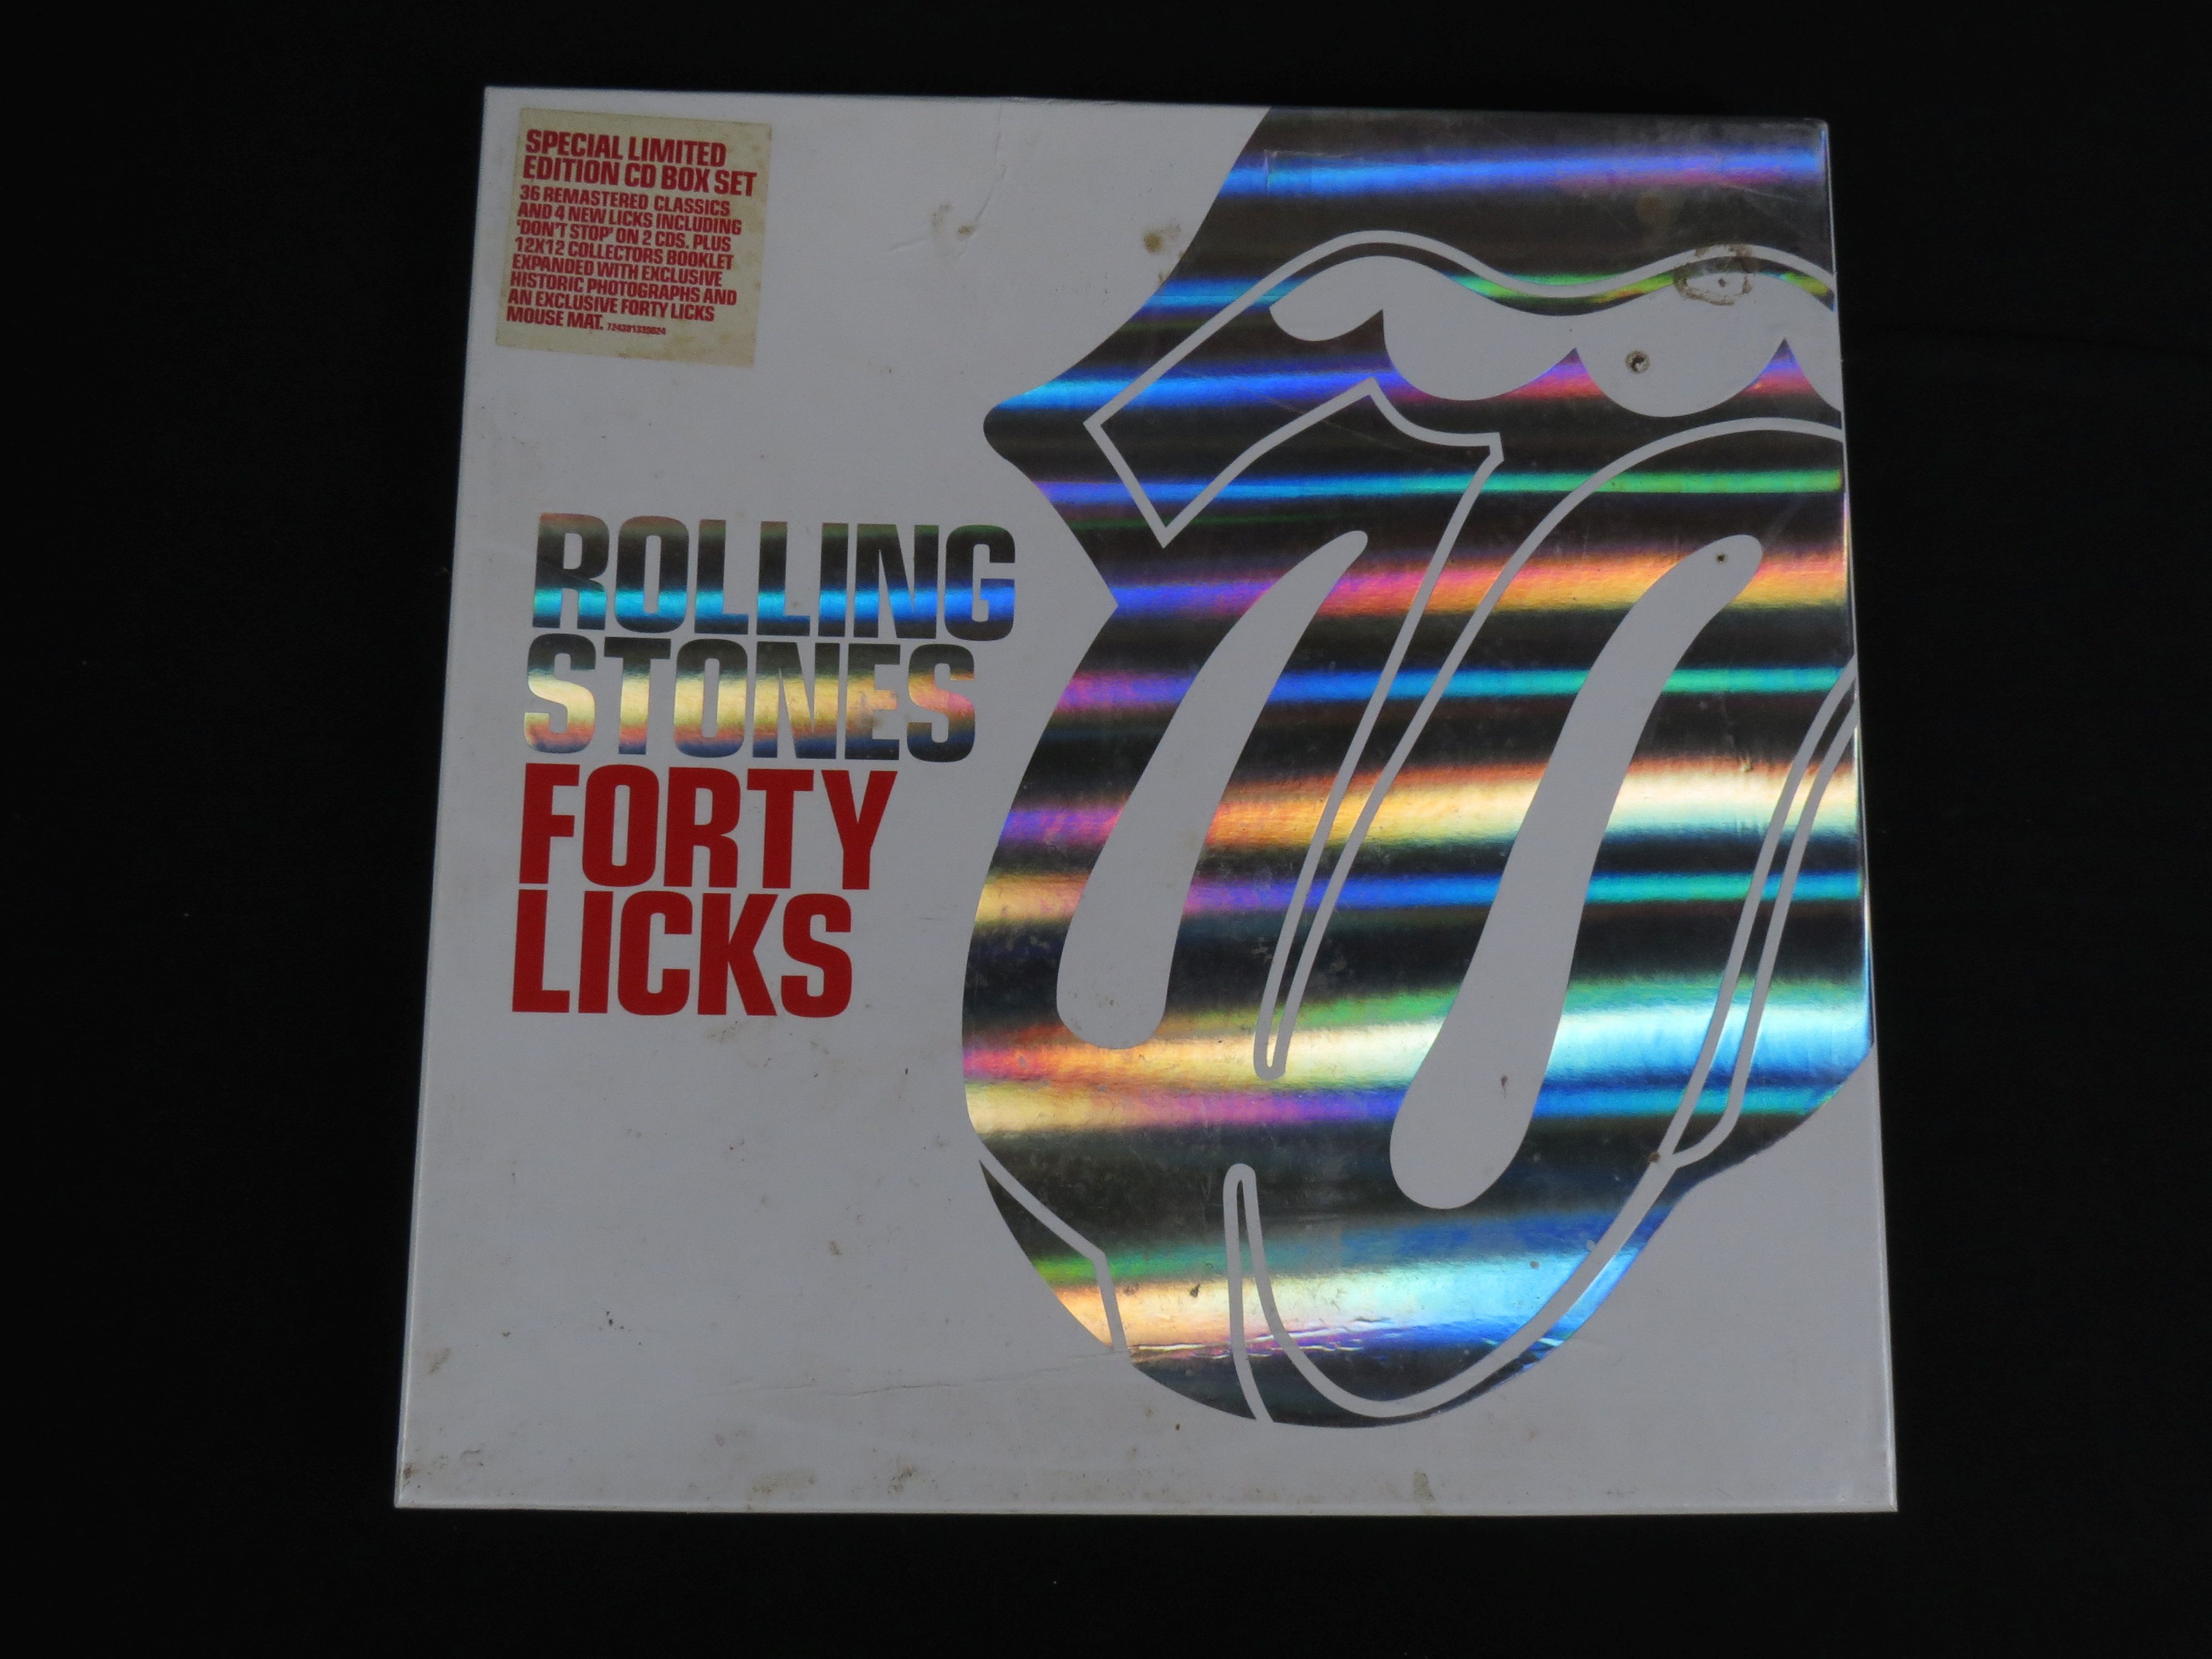 CDs / DVDs - Seven Rolling Stones Box Sets to include Forty Licks (box wear), ExileOn Main Street - Image 4 of 7